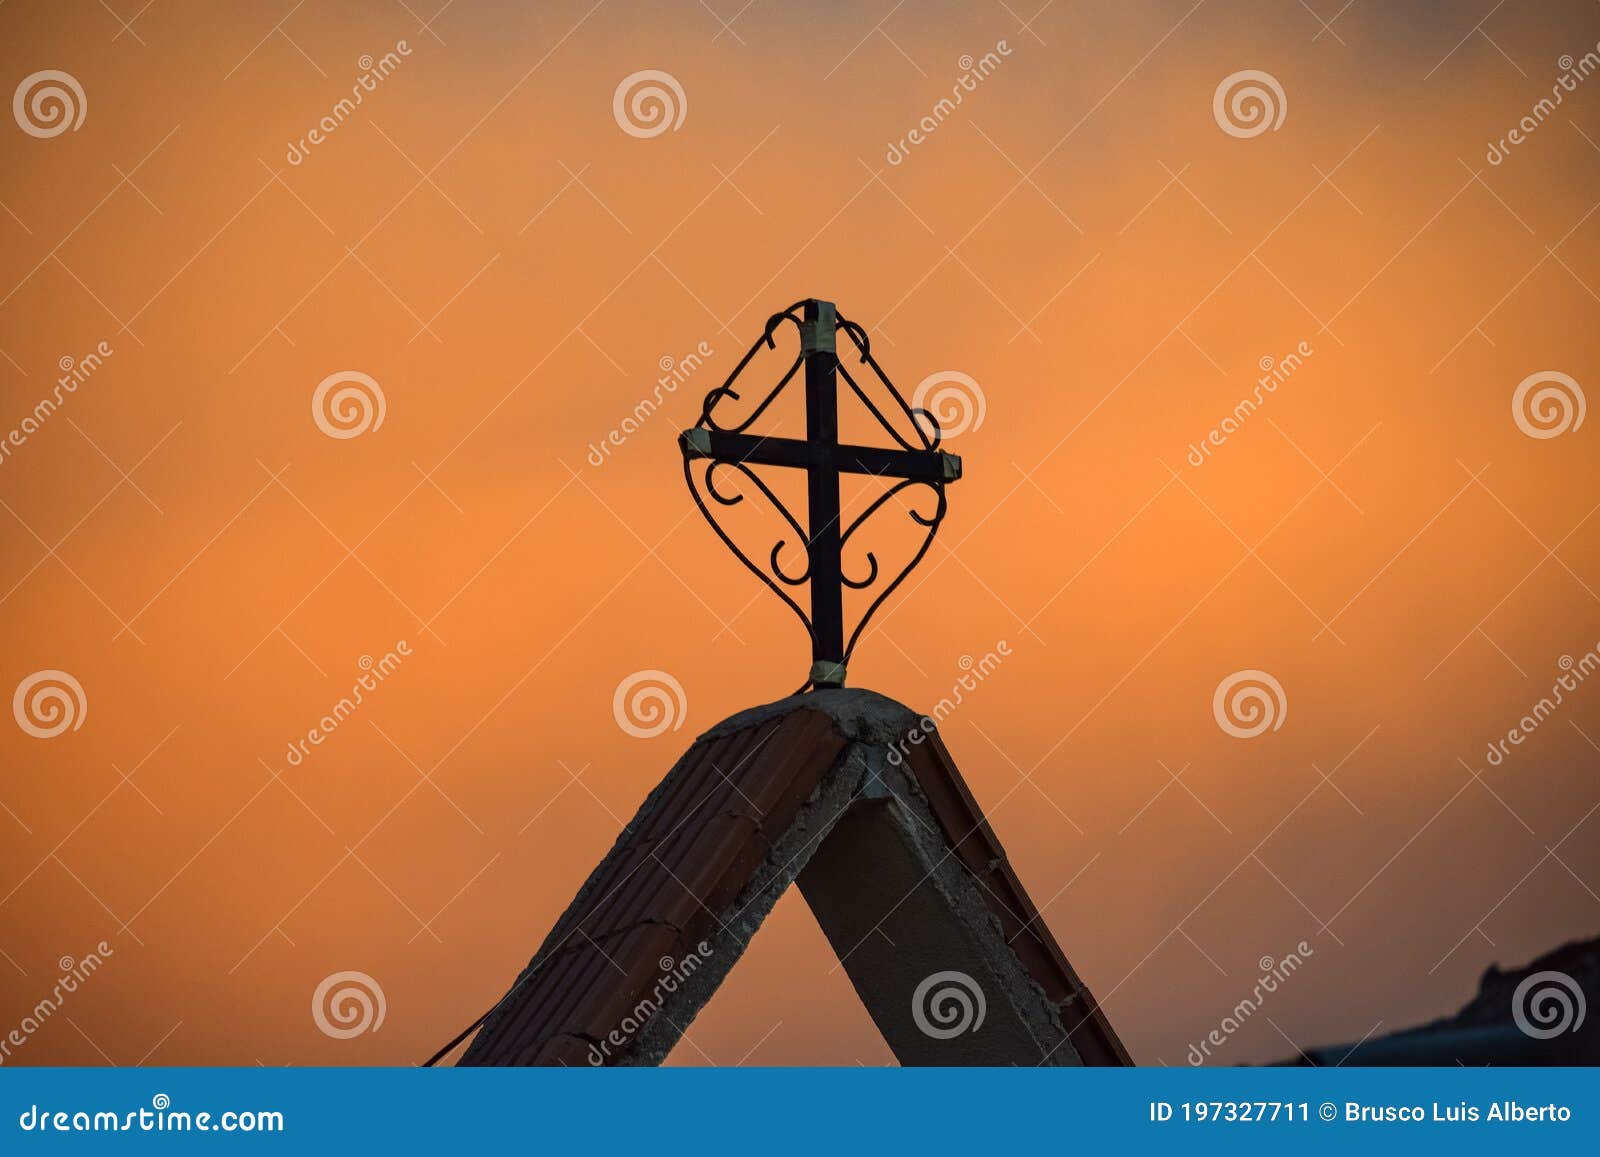 minimalism . the first lights of the day, orange sky and a religious cross in the forefront , in a nw desert region of argentina